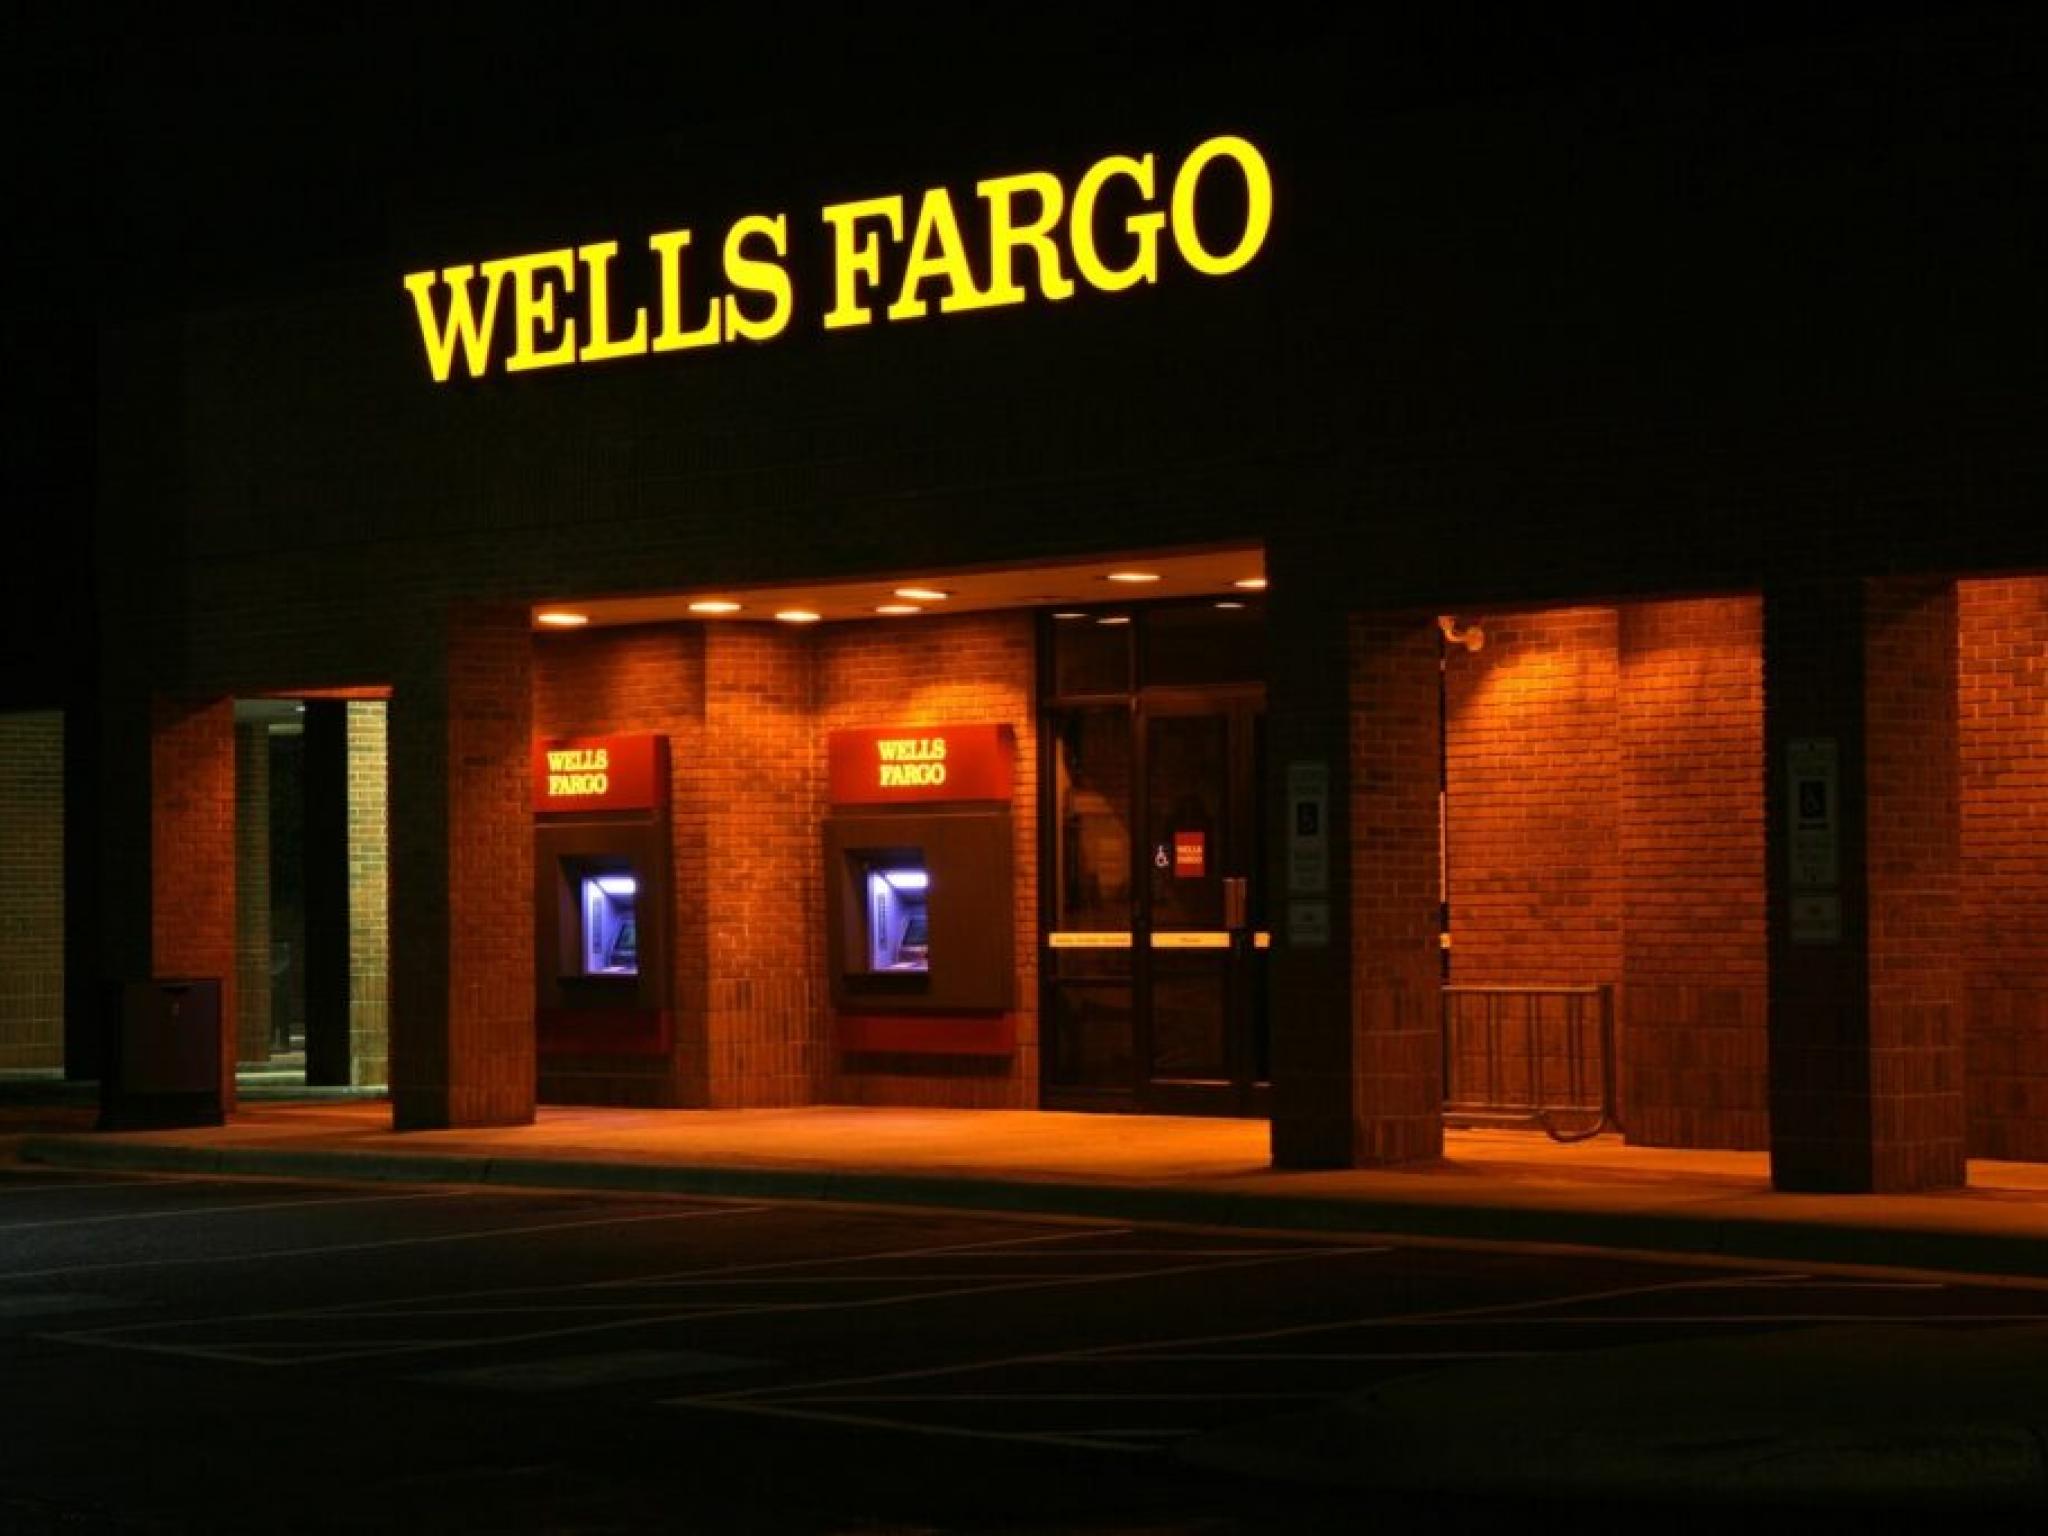  wells-fargo-posts-q2-earnings-joins-snowflake-and-other-big-stocks-moving-lower-in-fridays-pre-market-session 